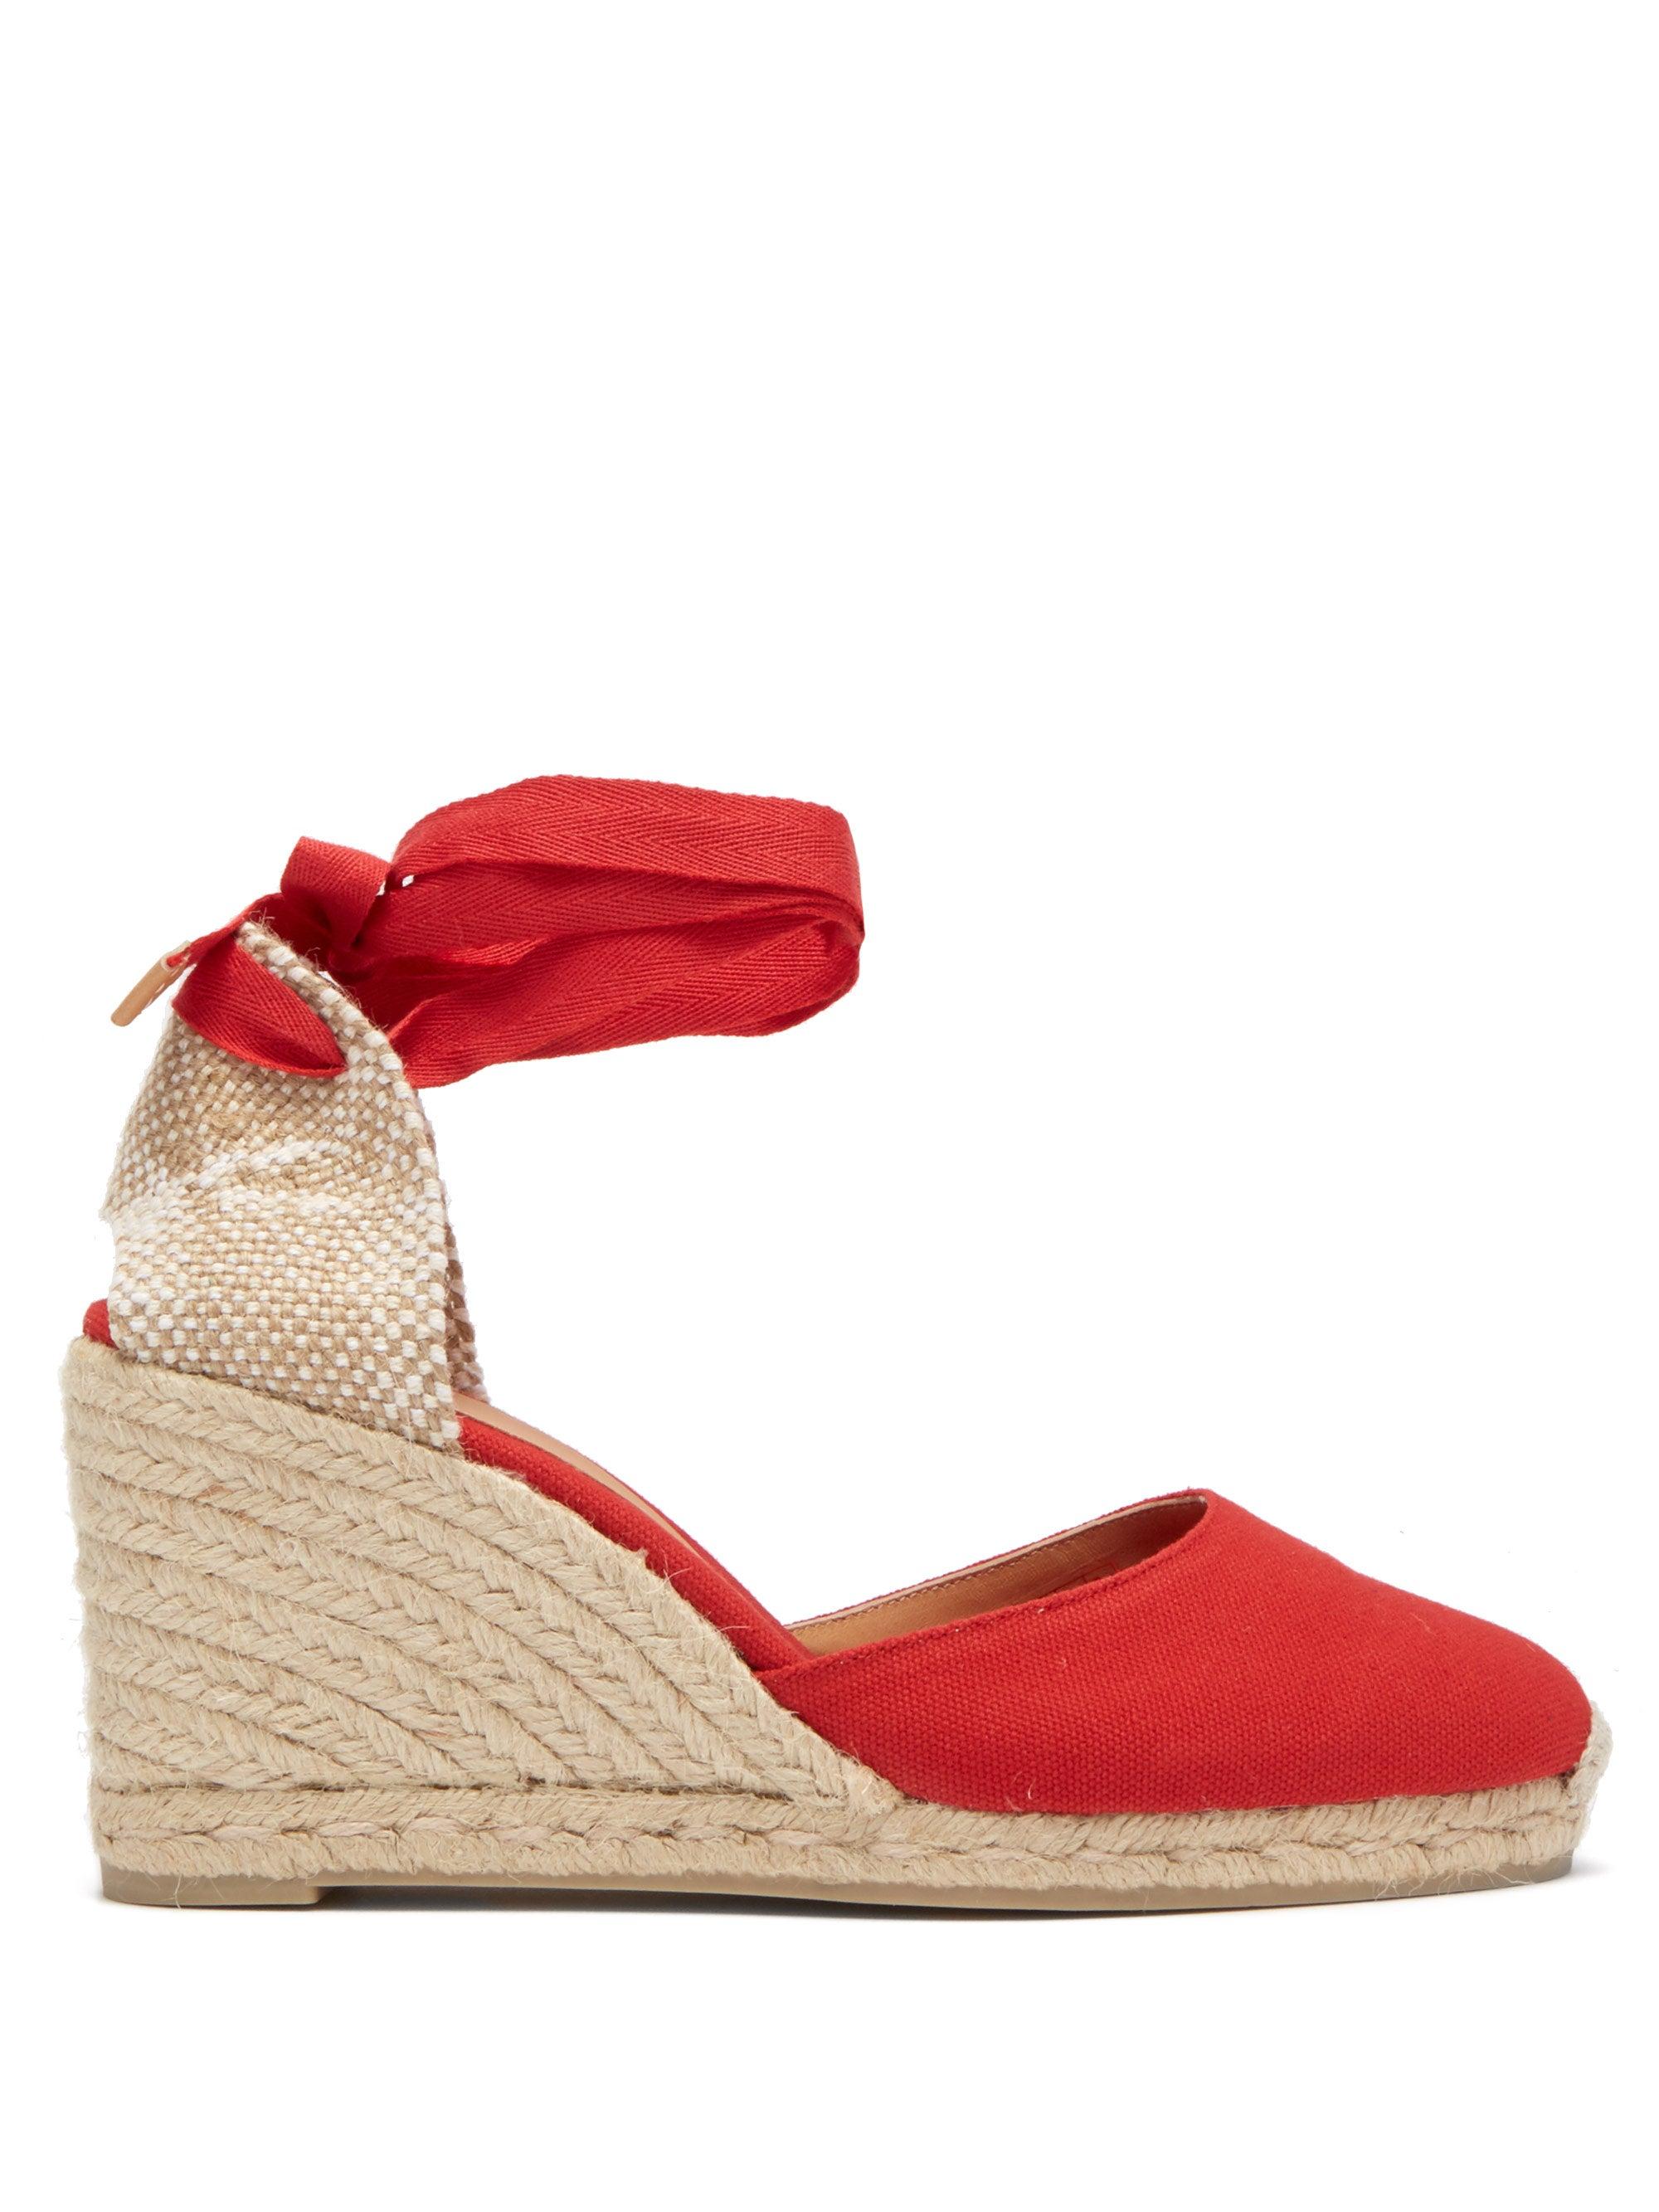 Castaner Carina 80 Canvas & Jute Espadrille Wedges in Red - Save 16% - Lyst